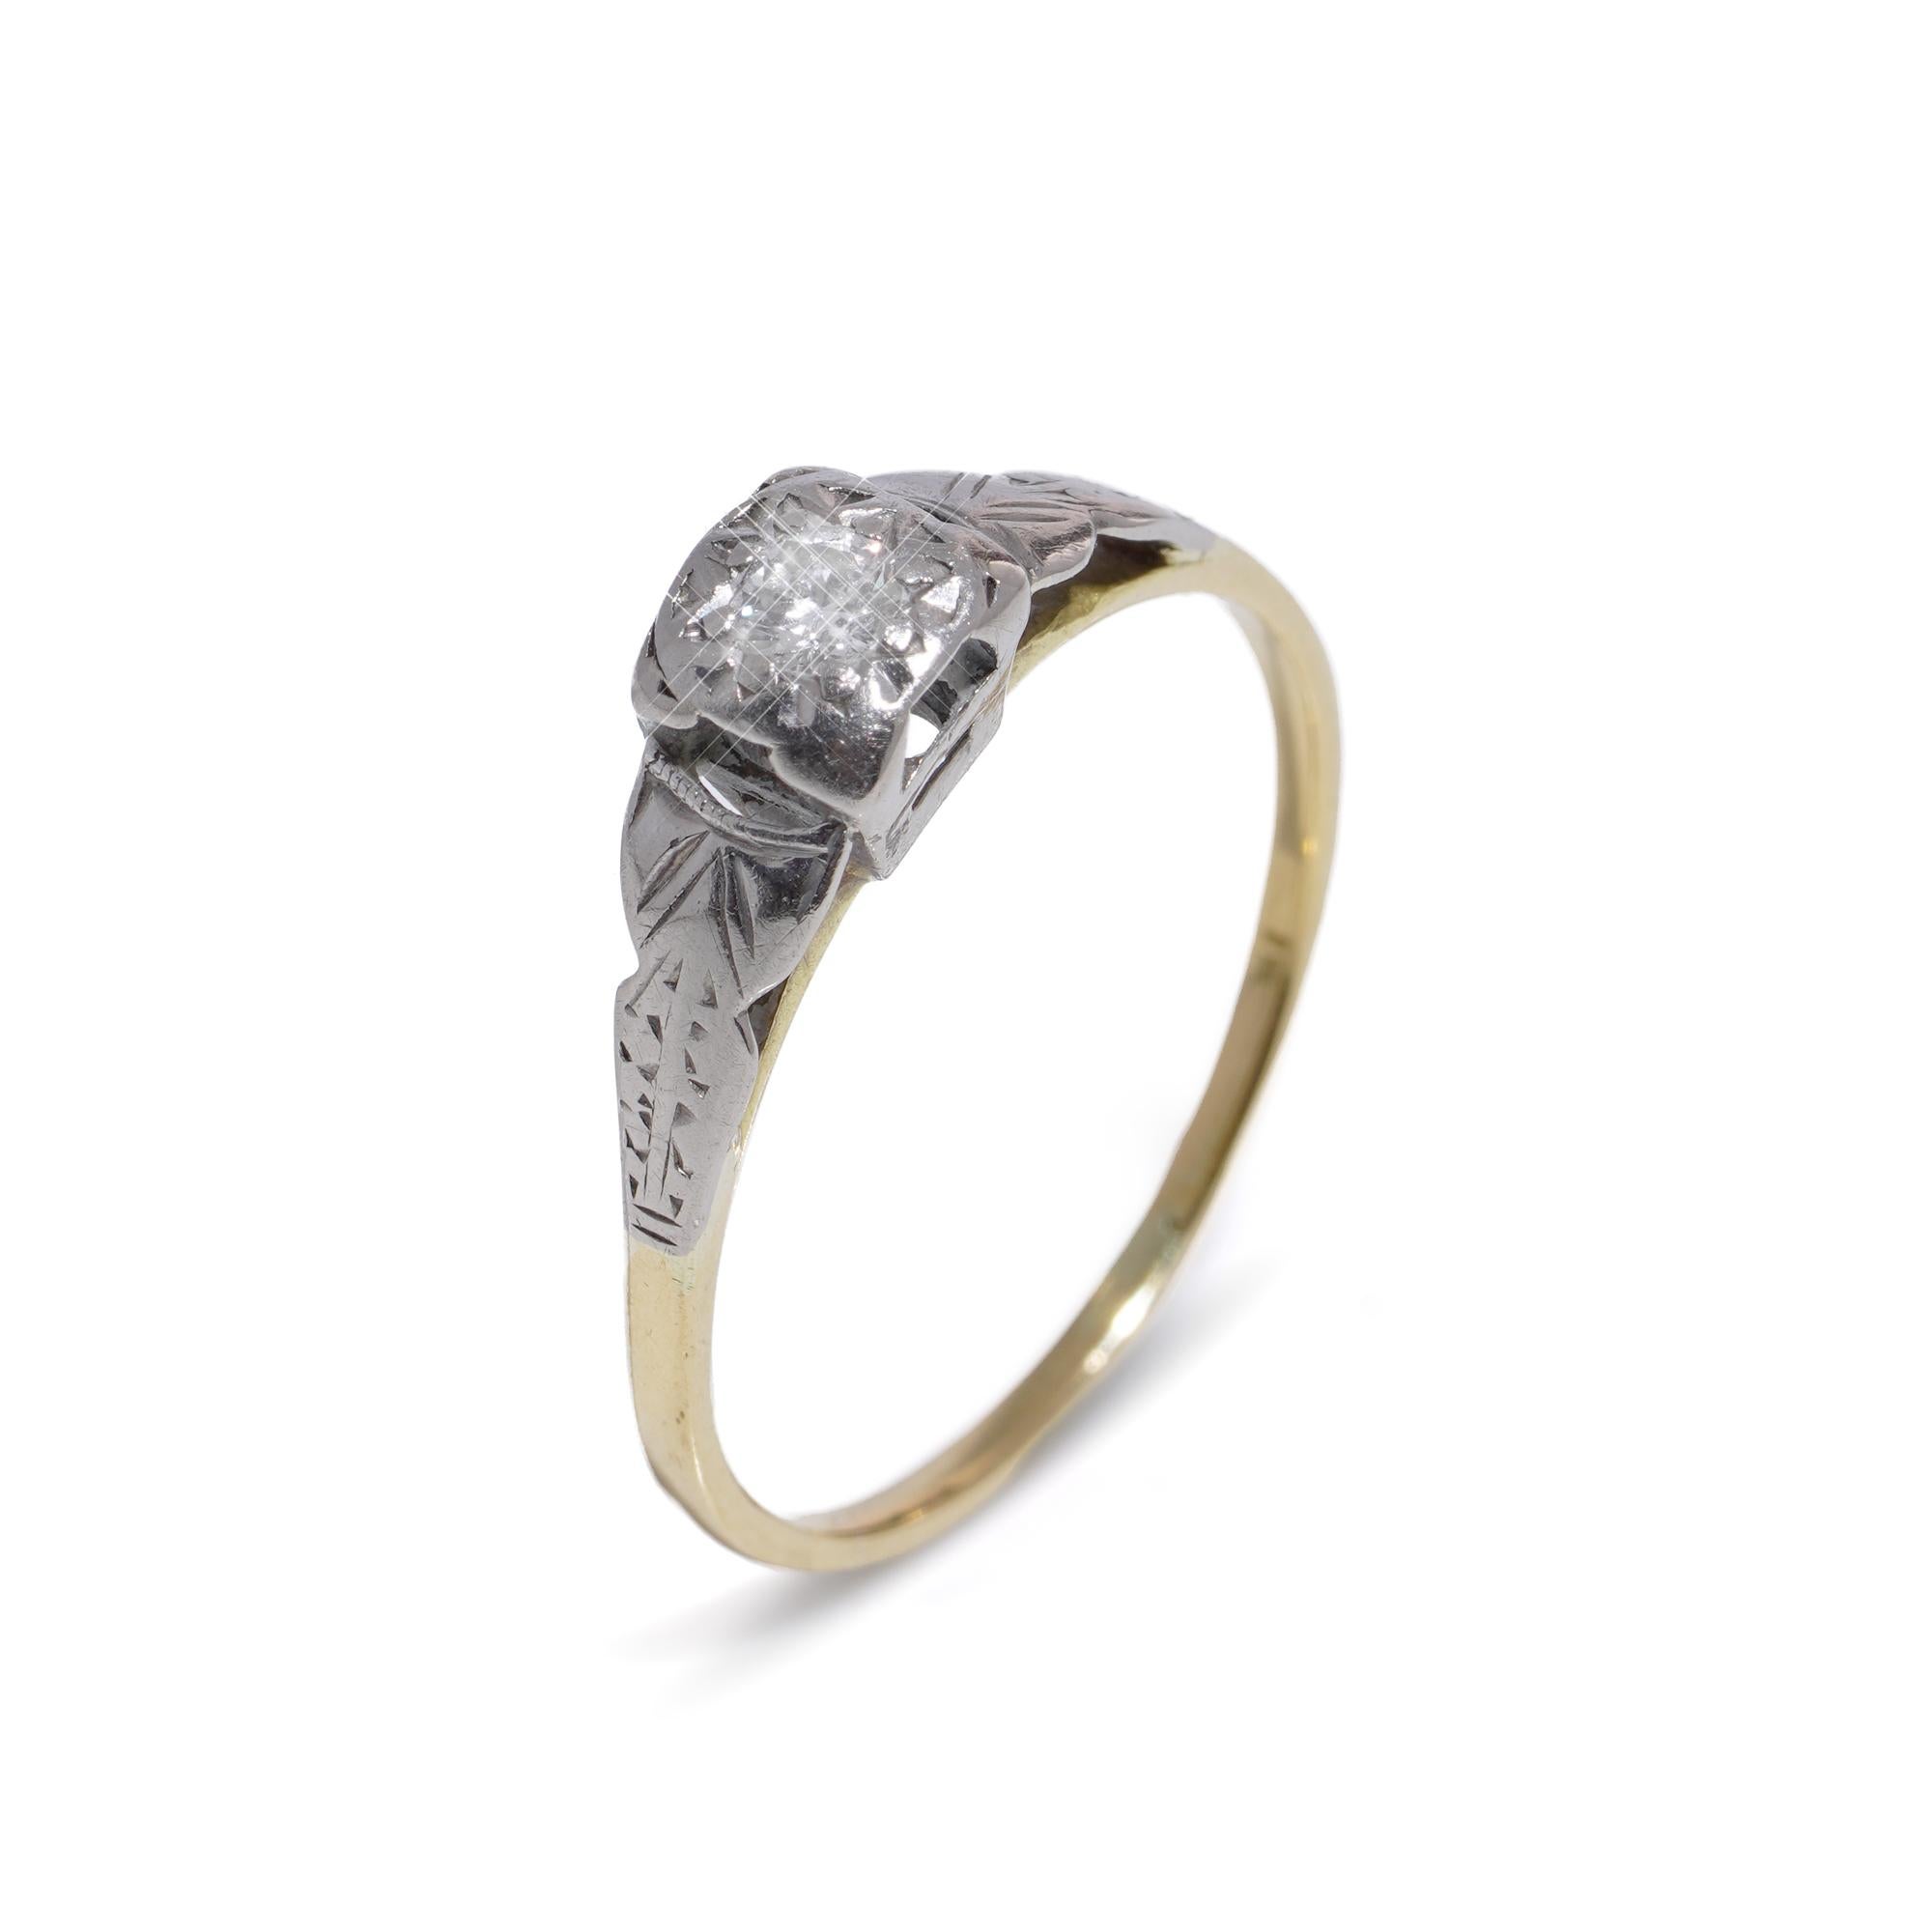 Vintage 18kt yellow and white gold diamond solitaire ring.
X-Ray tested positive for 18kt gold.

Dimensions -
Finger Size (UK) = Q 1/2 (EU) = 58.5 (US) = 8.75
Weight: 2.00 grams

Diamond -
Cut: Round brilliant
Quantity of stones: 1
Carat weight: